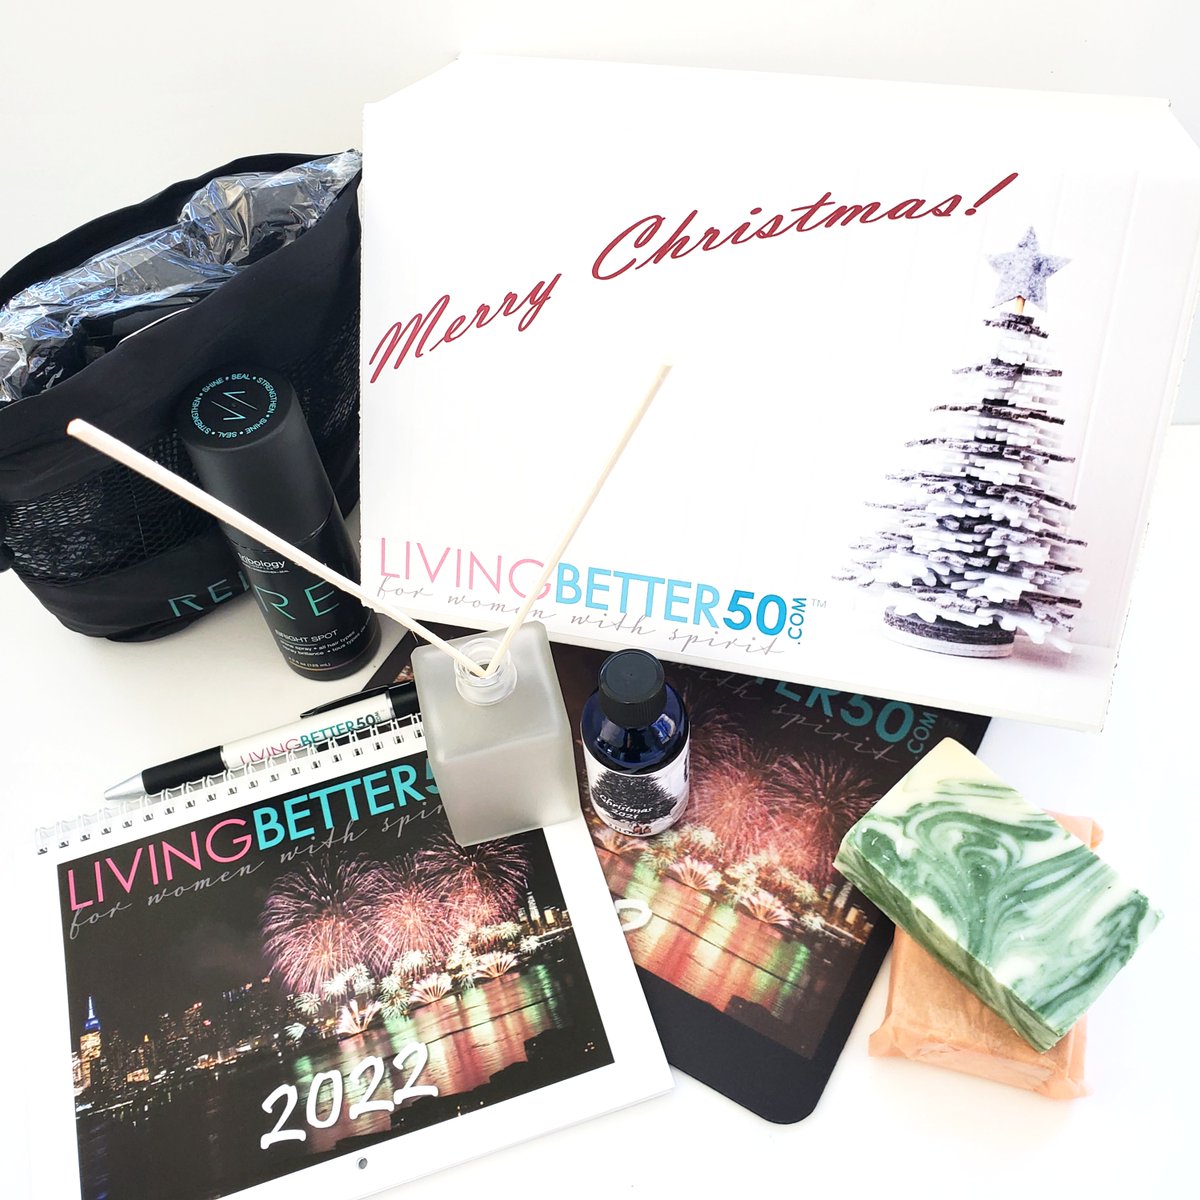 The Best Subscription Box for Women Over 50
gift guide 2021Receive the Best of Beauty, Fashion, Fitness, Health, Home, and Faith Surprises for Women over 50 monthly! 

#subscriptionbox #women #womenover50 #subscriptionboxforwomen #livingbetter50 #livingbetter